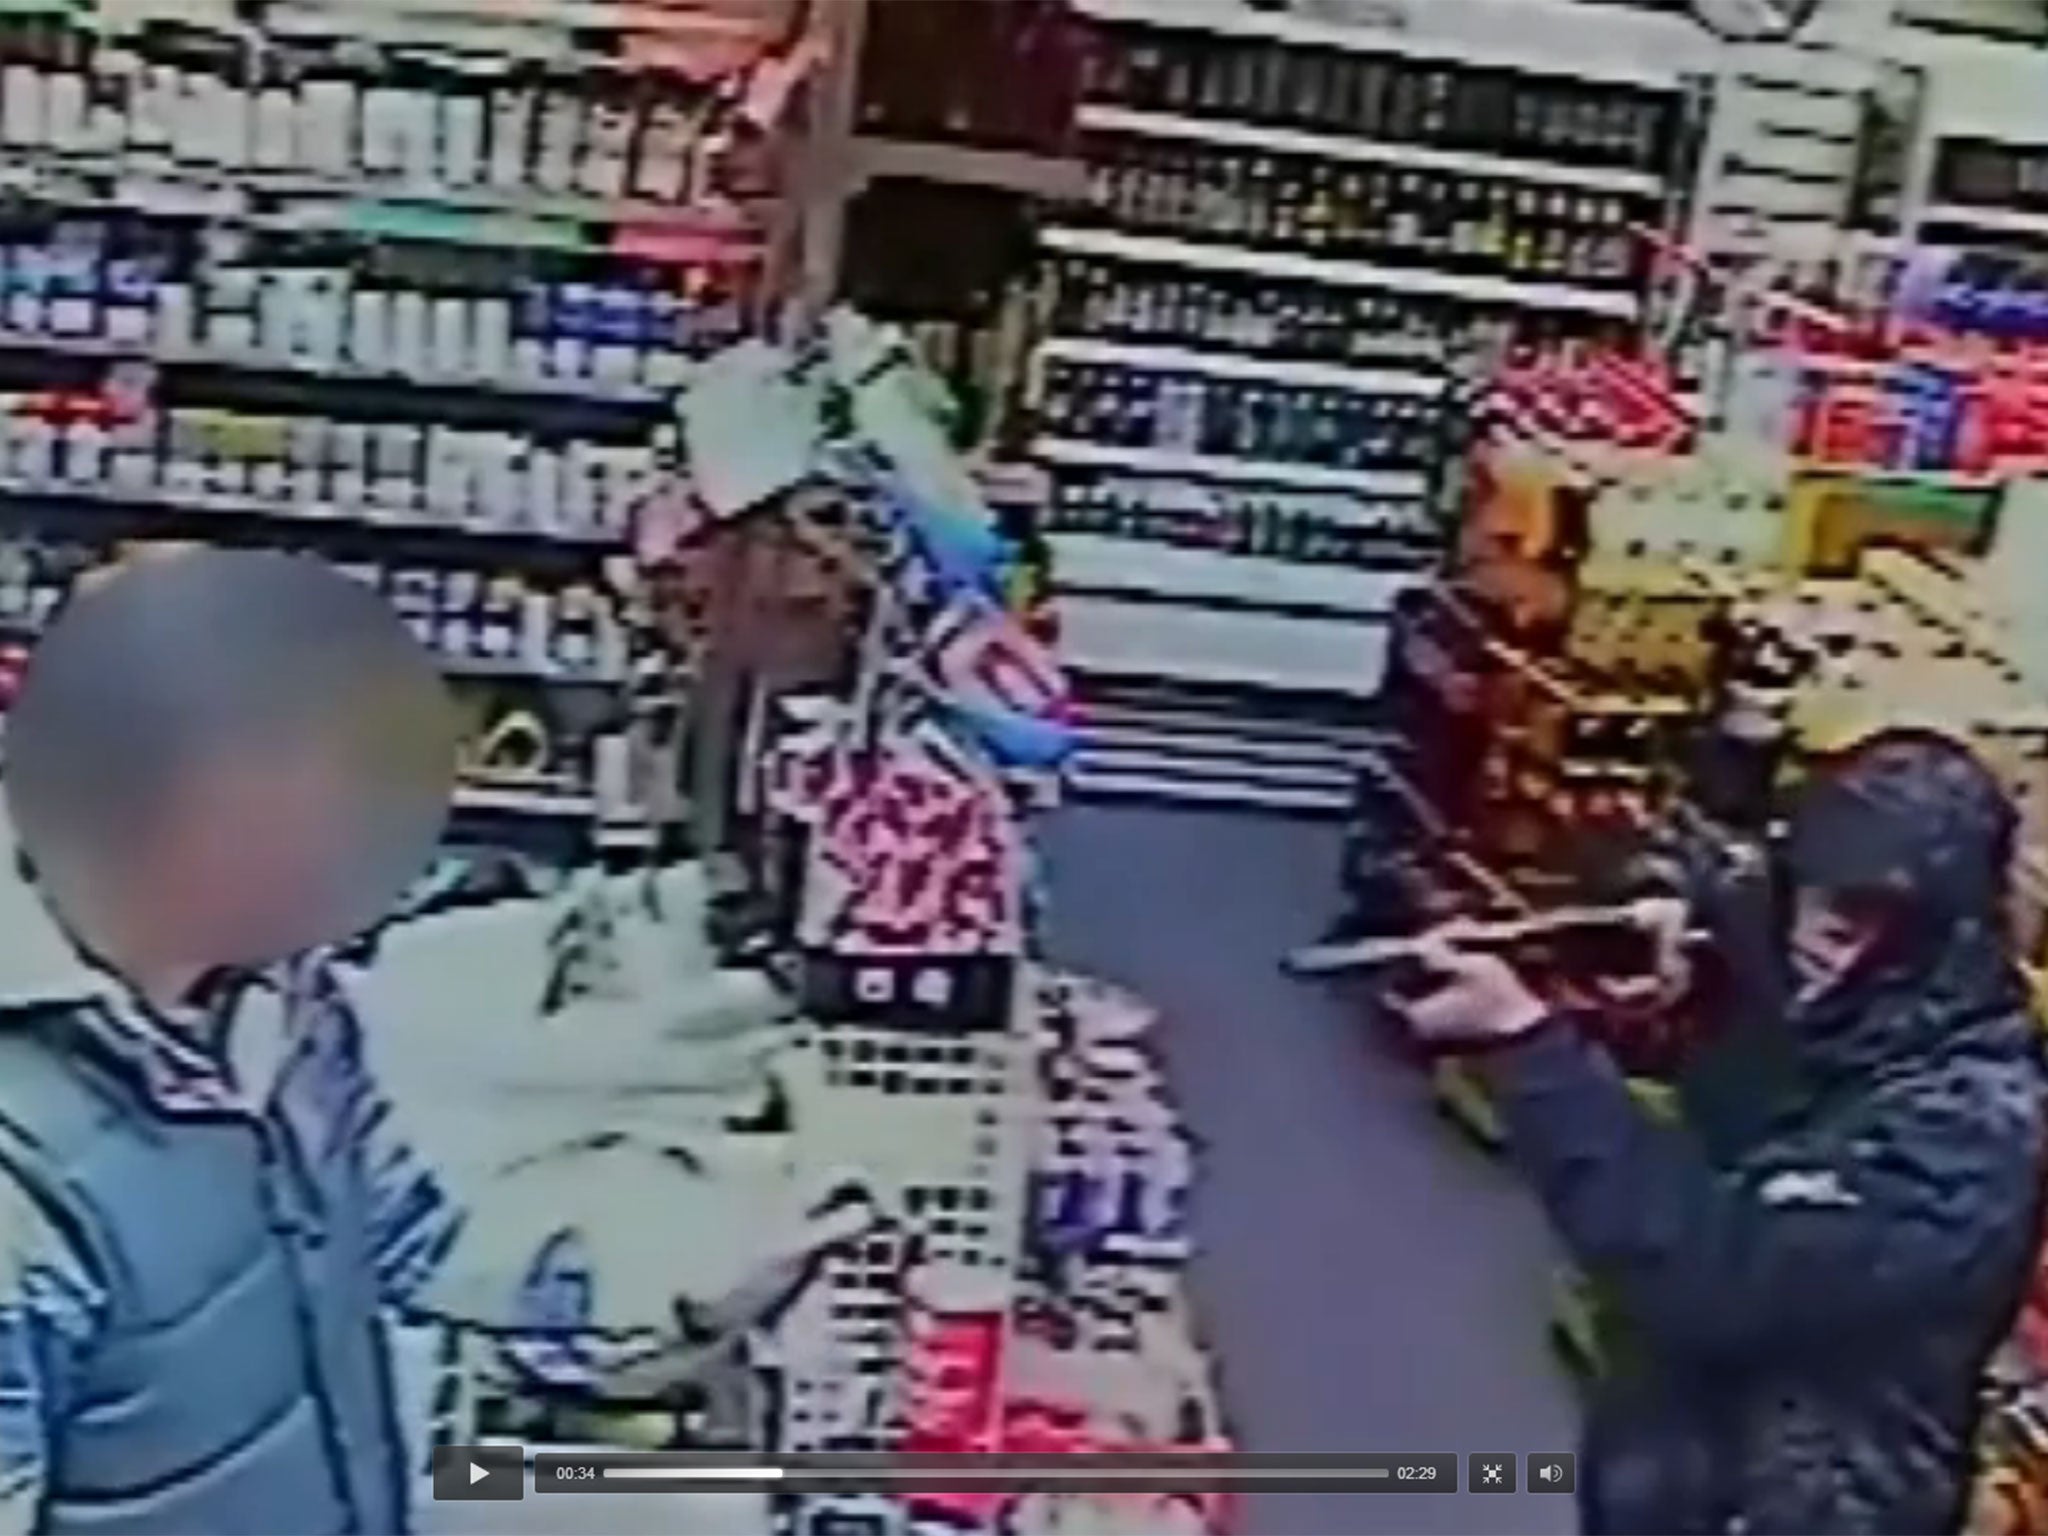 The appeal came as a detectives released CCTV footage taken during the attempted raid on a convenience store in Plaistow.